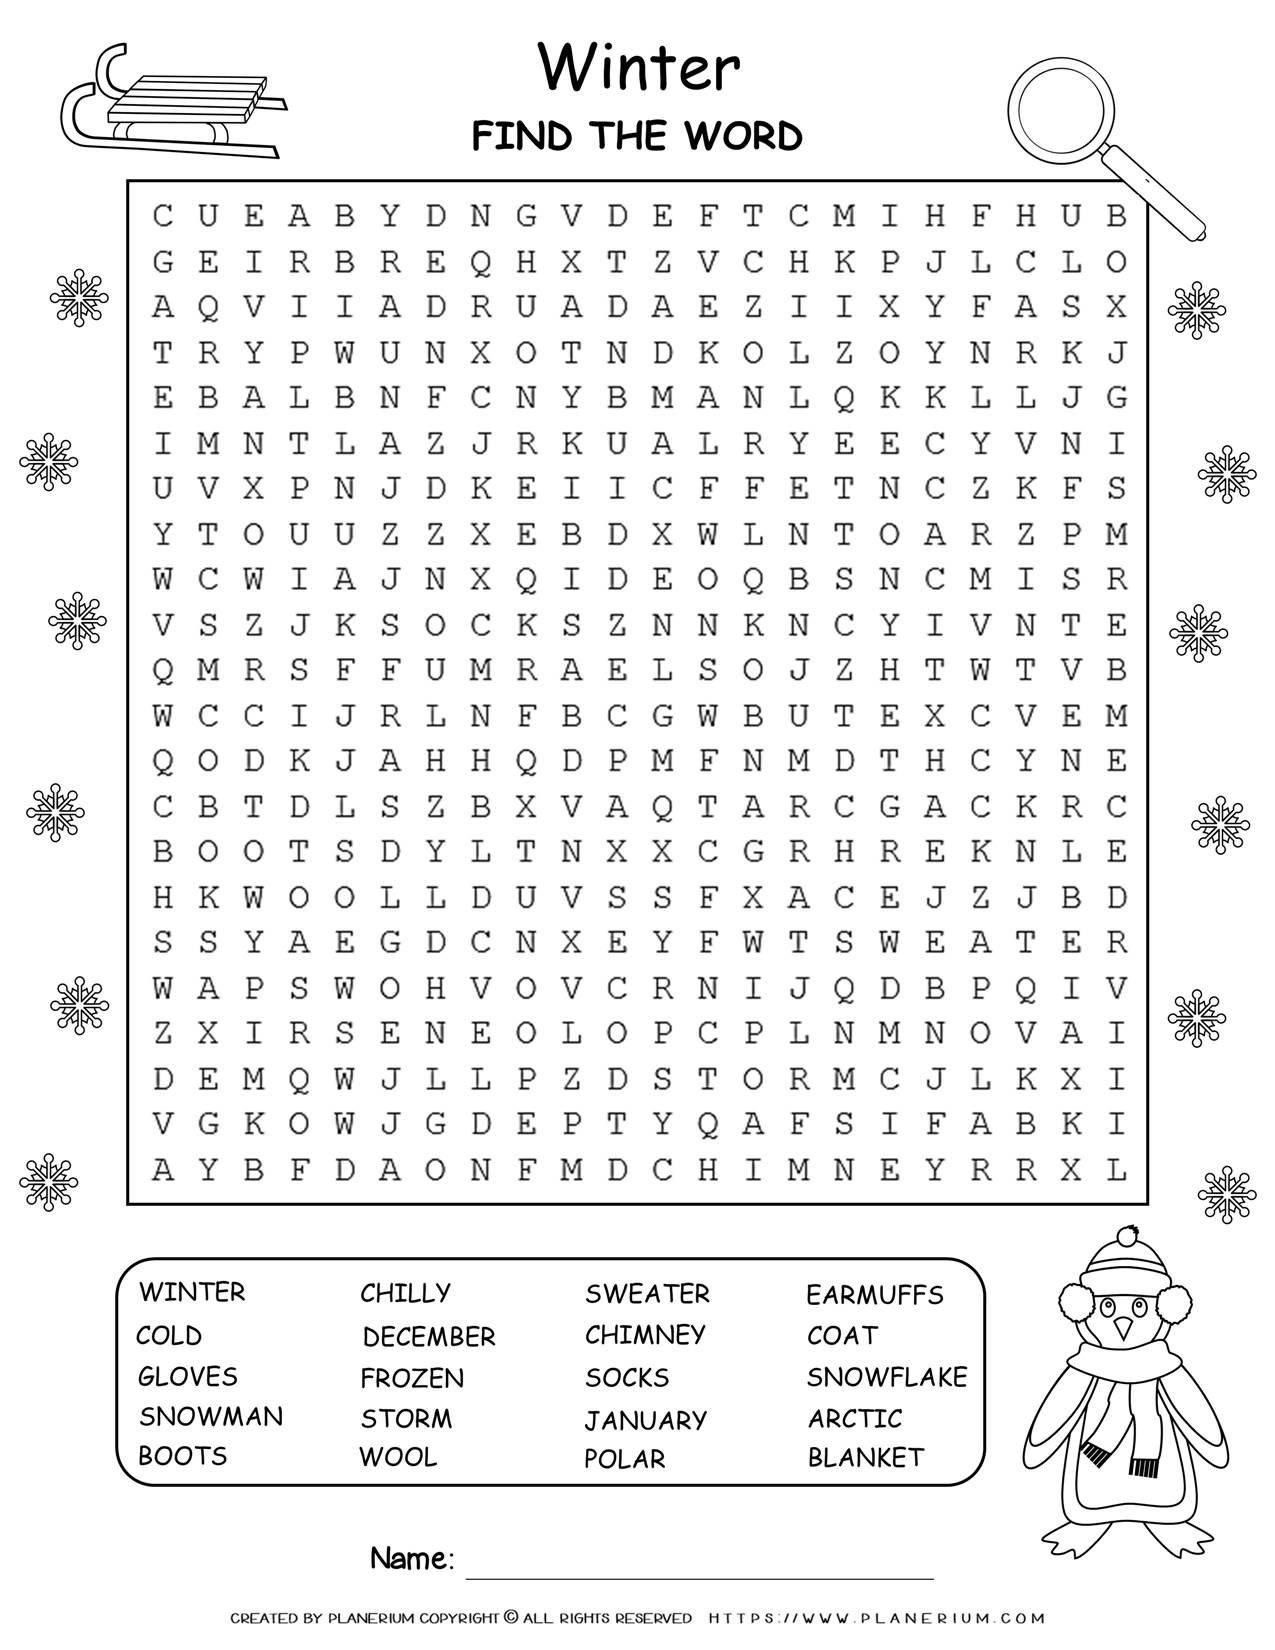 winter-word-search-puzzle-for-kids-free-printable-planerium